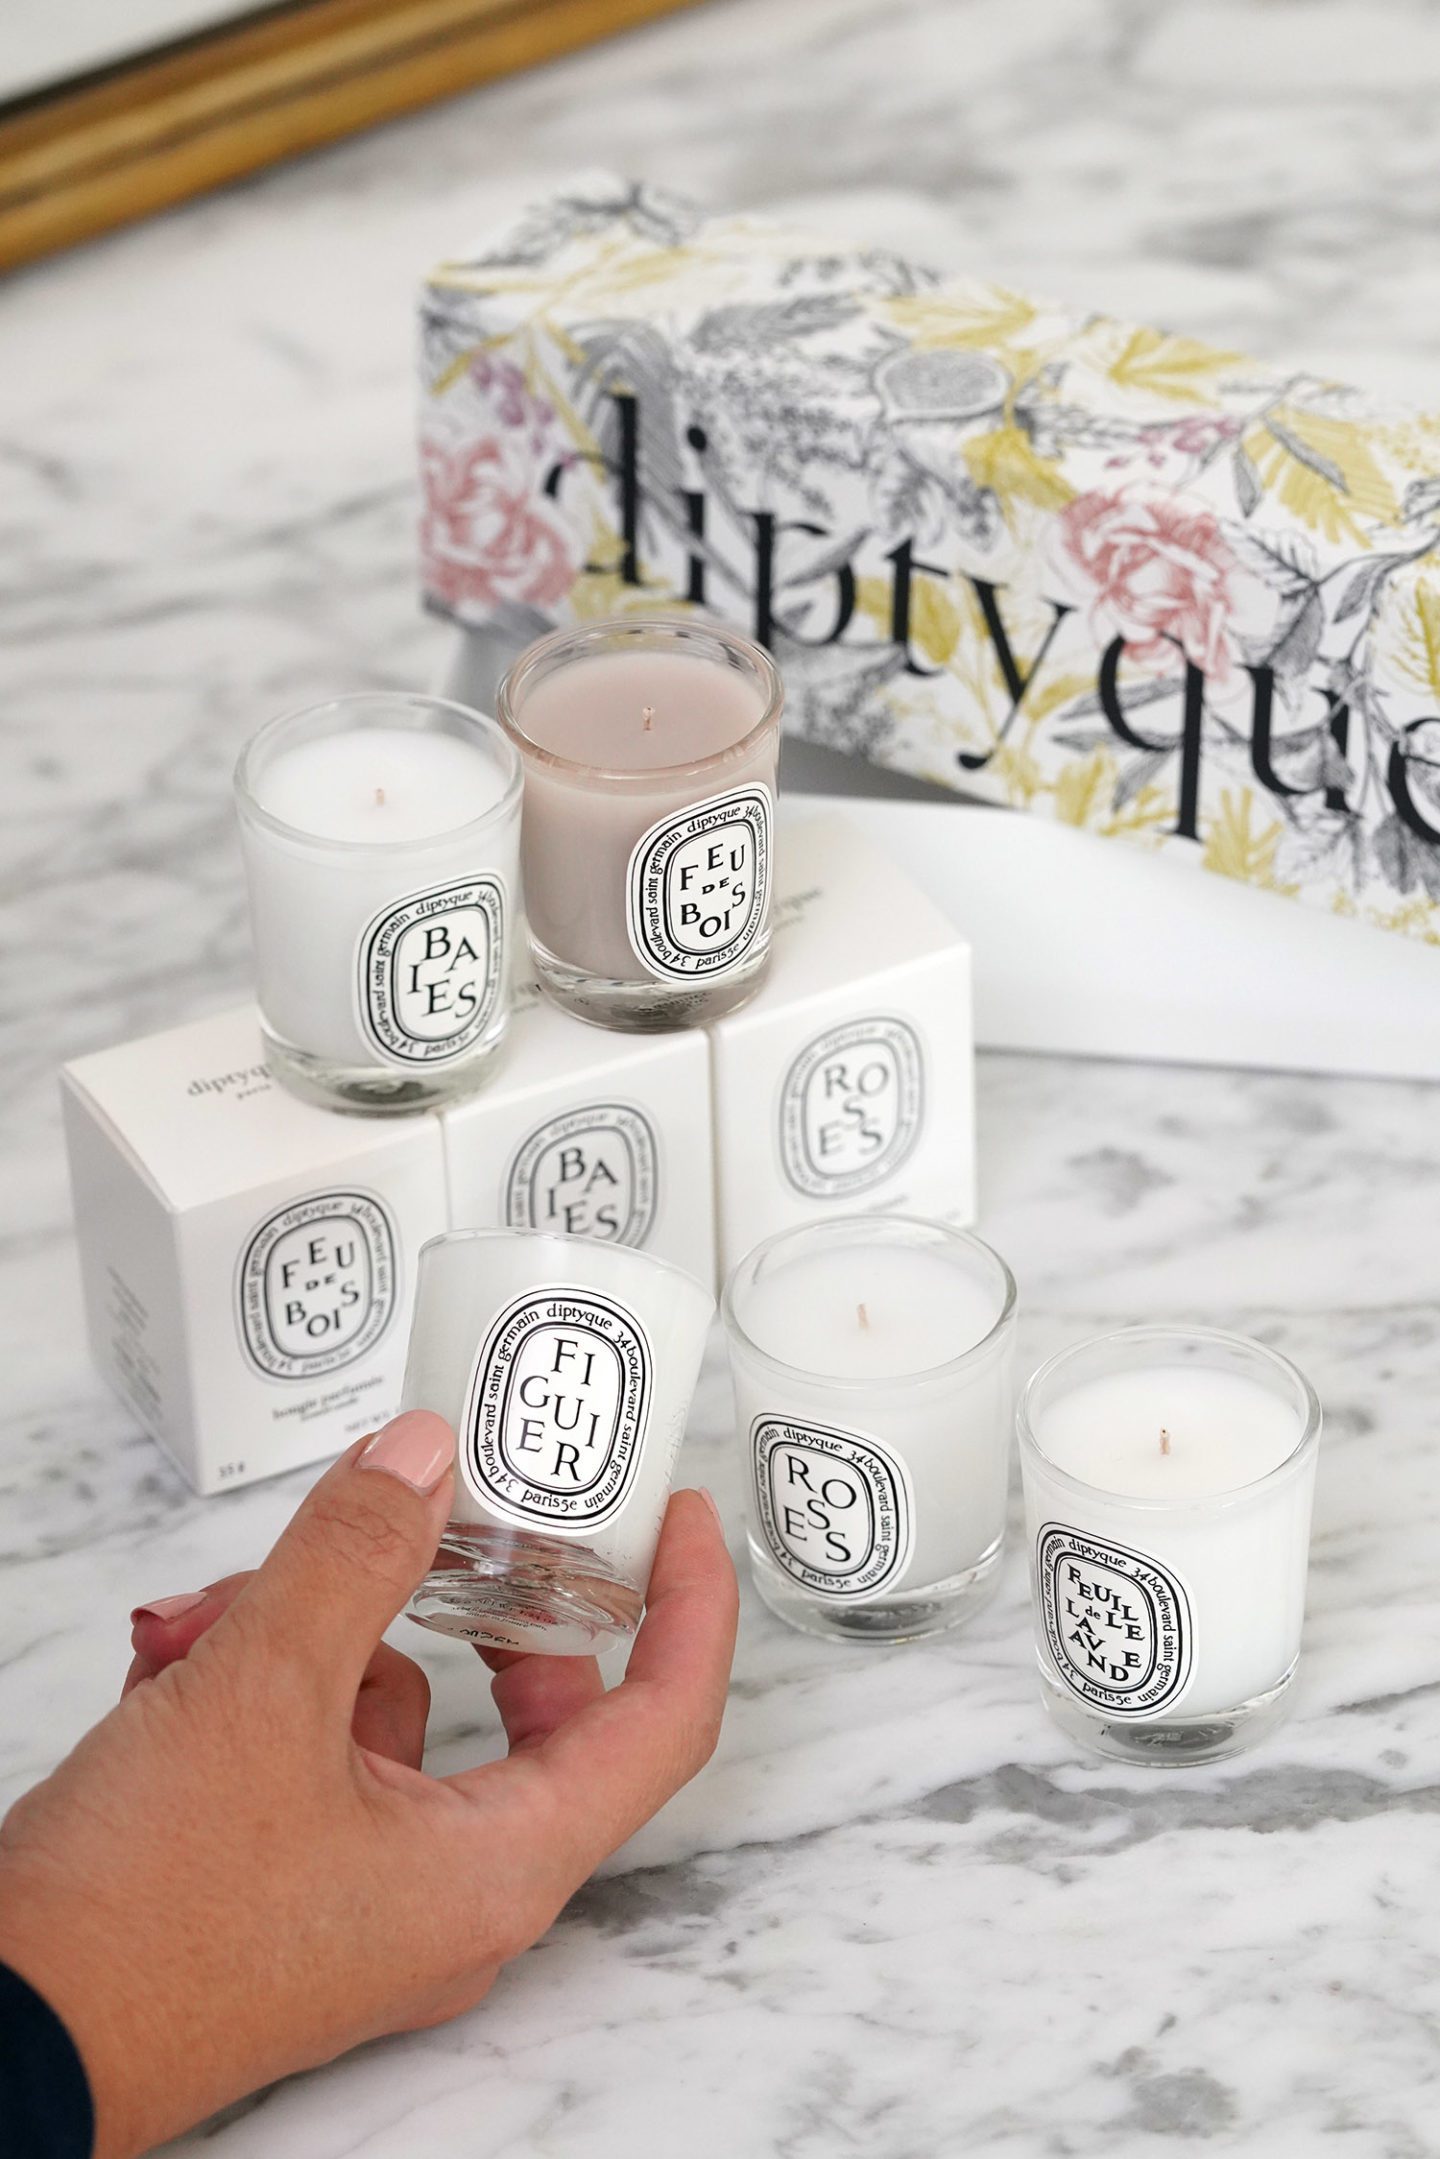 Diptyque Mini Candle Set Nordstrom Anniversary Sale 2021